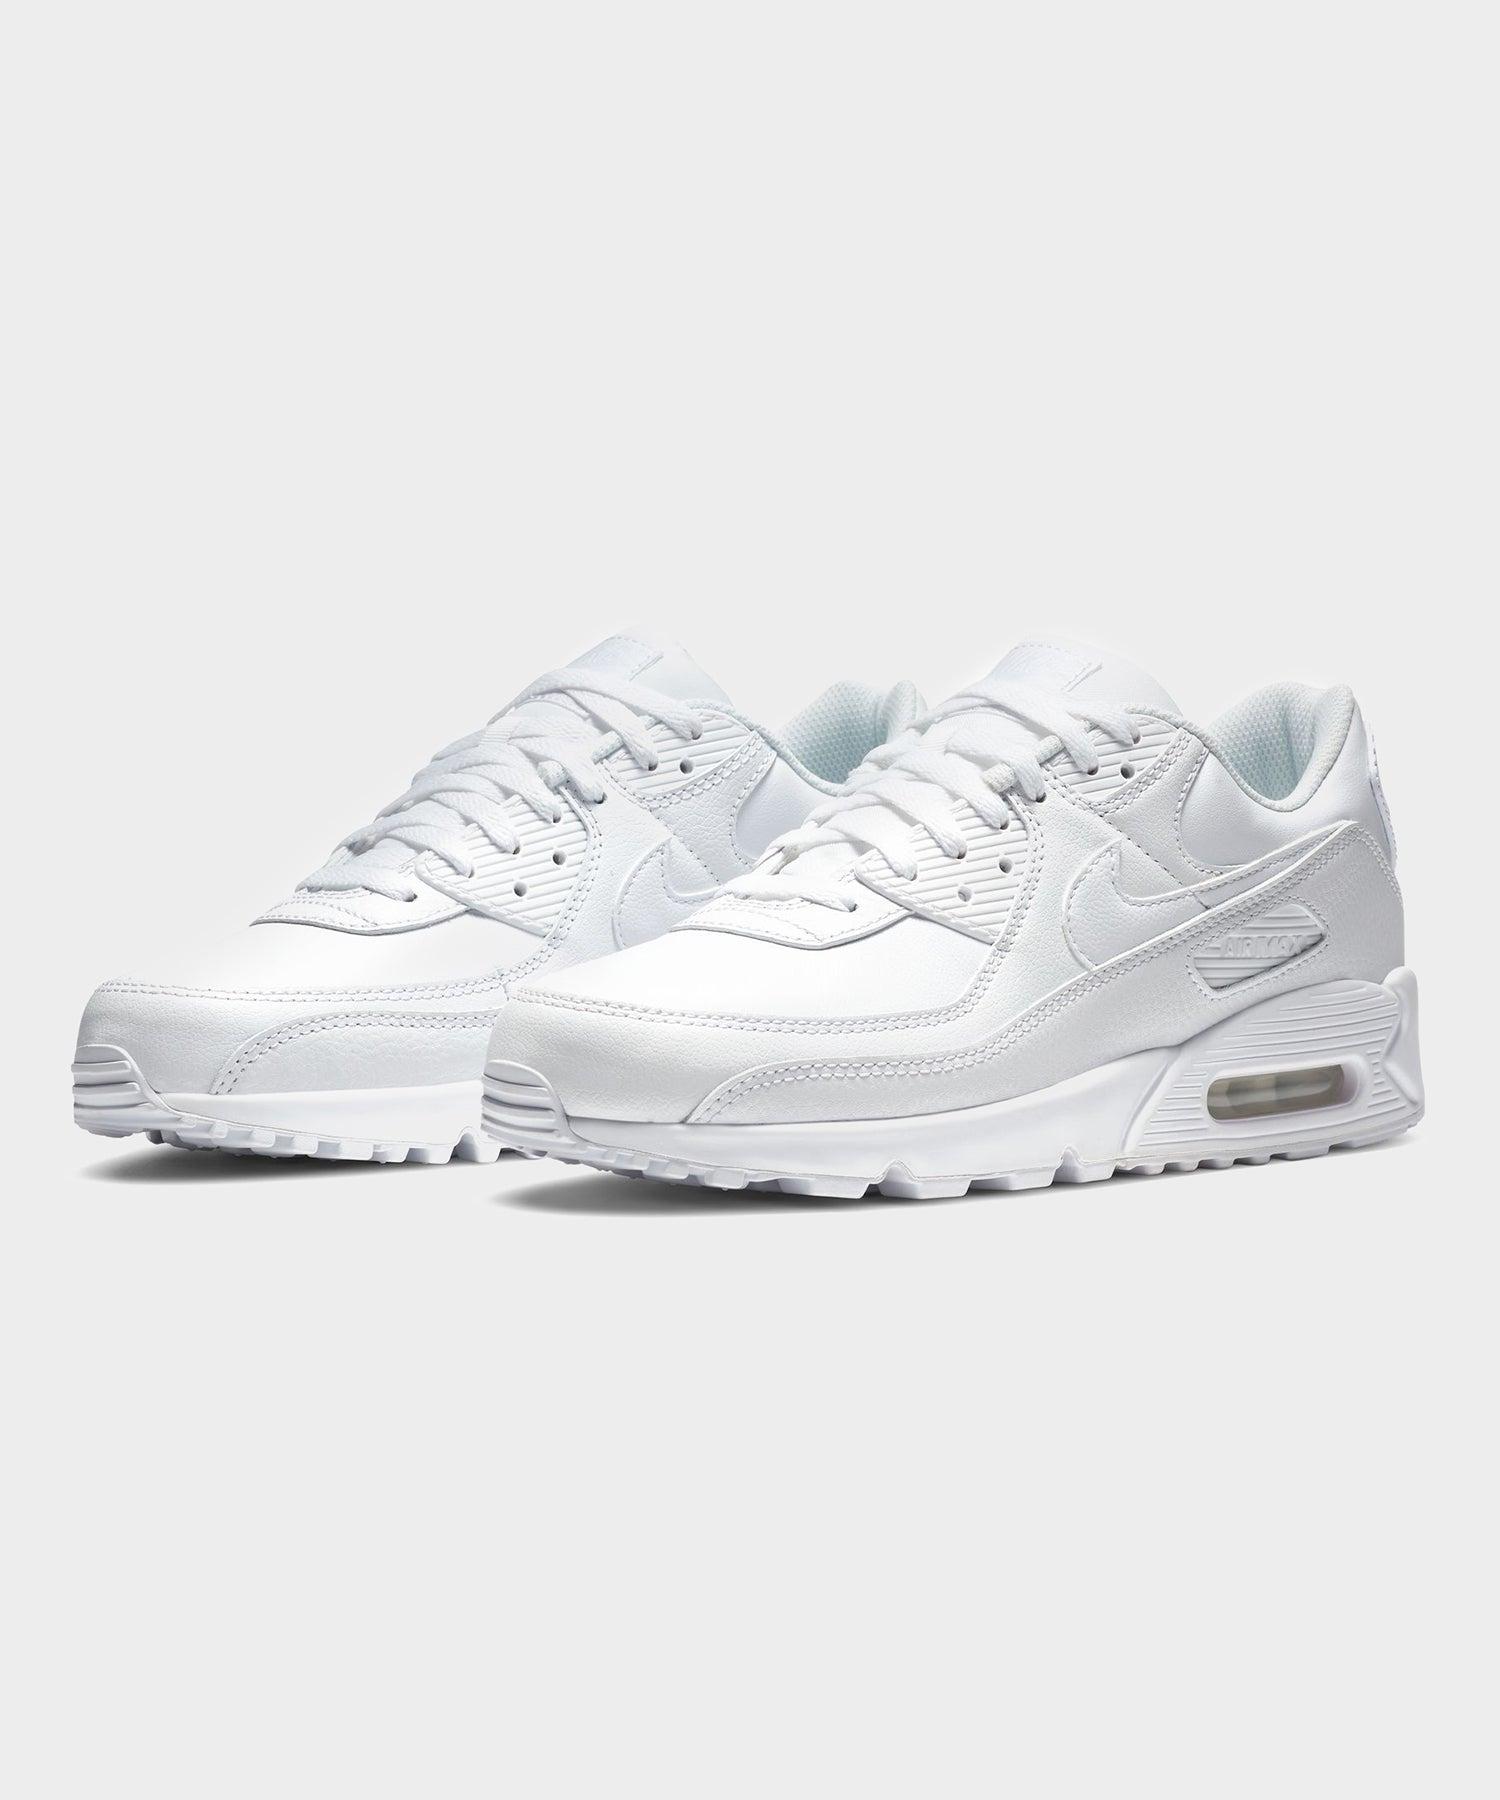 Mysterious Wednesday latch Nike Air Max 90 Ltr White in Metallic for Men | Lyst